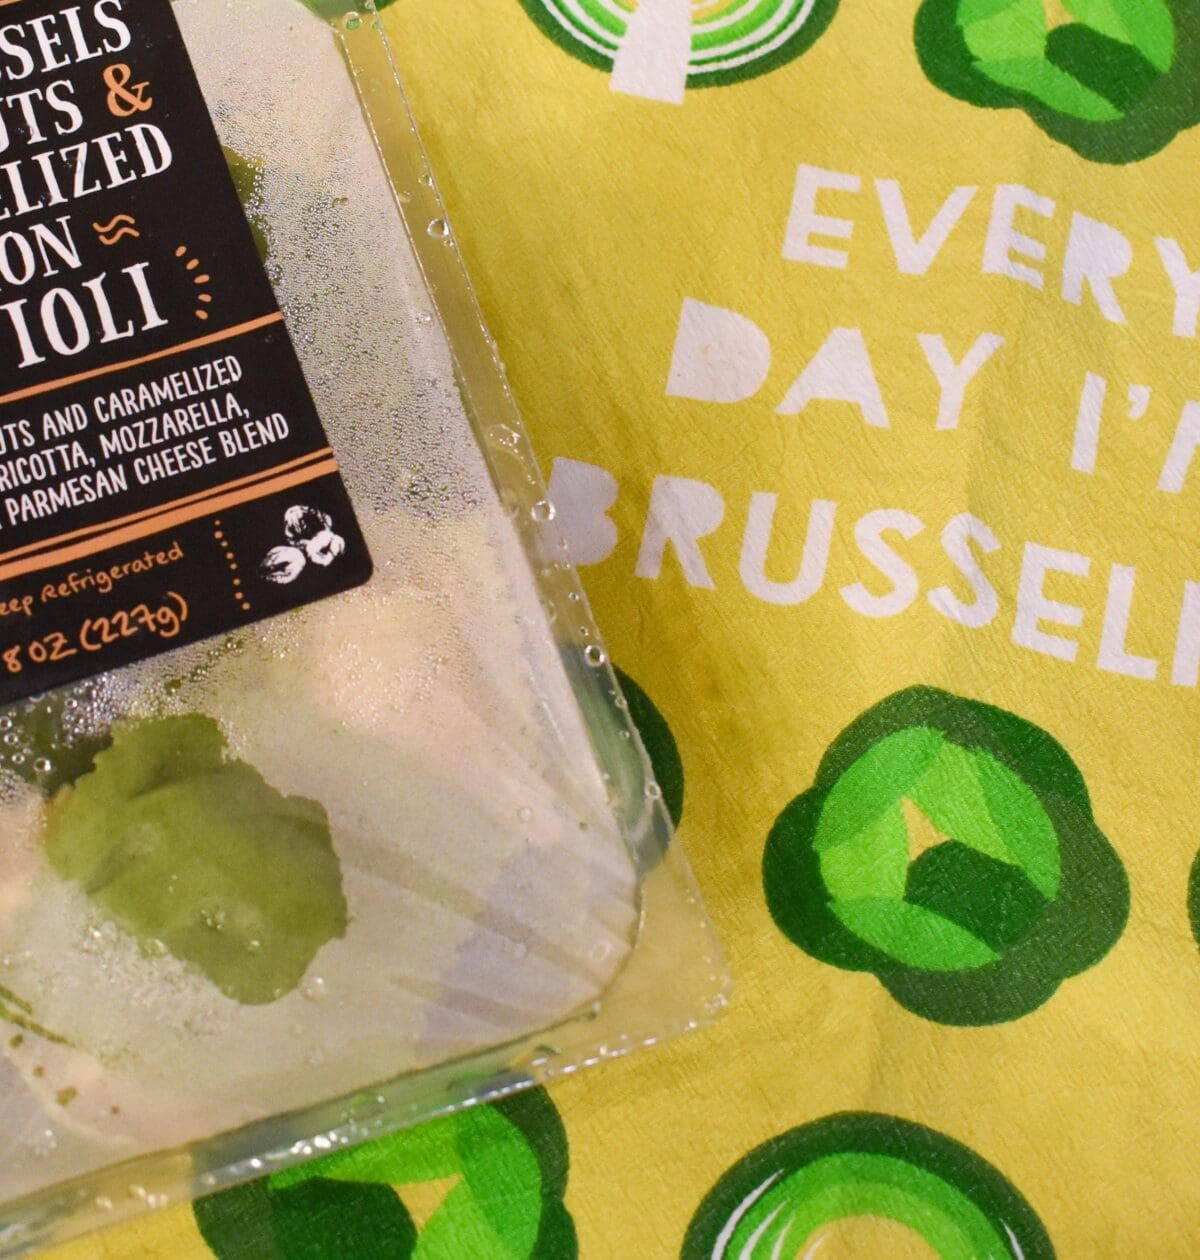 Recently, I picked up the Trader Joe's Brussels Sprout and Caramelized Onion Ravioli to try for dinner. Long story short, these might be my new favorite fresh pasta option out there. Read the full review of the colorful and flavorful ravioli here!